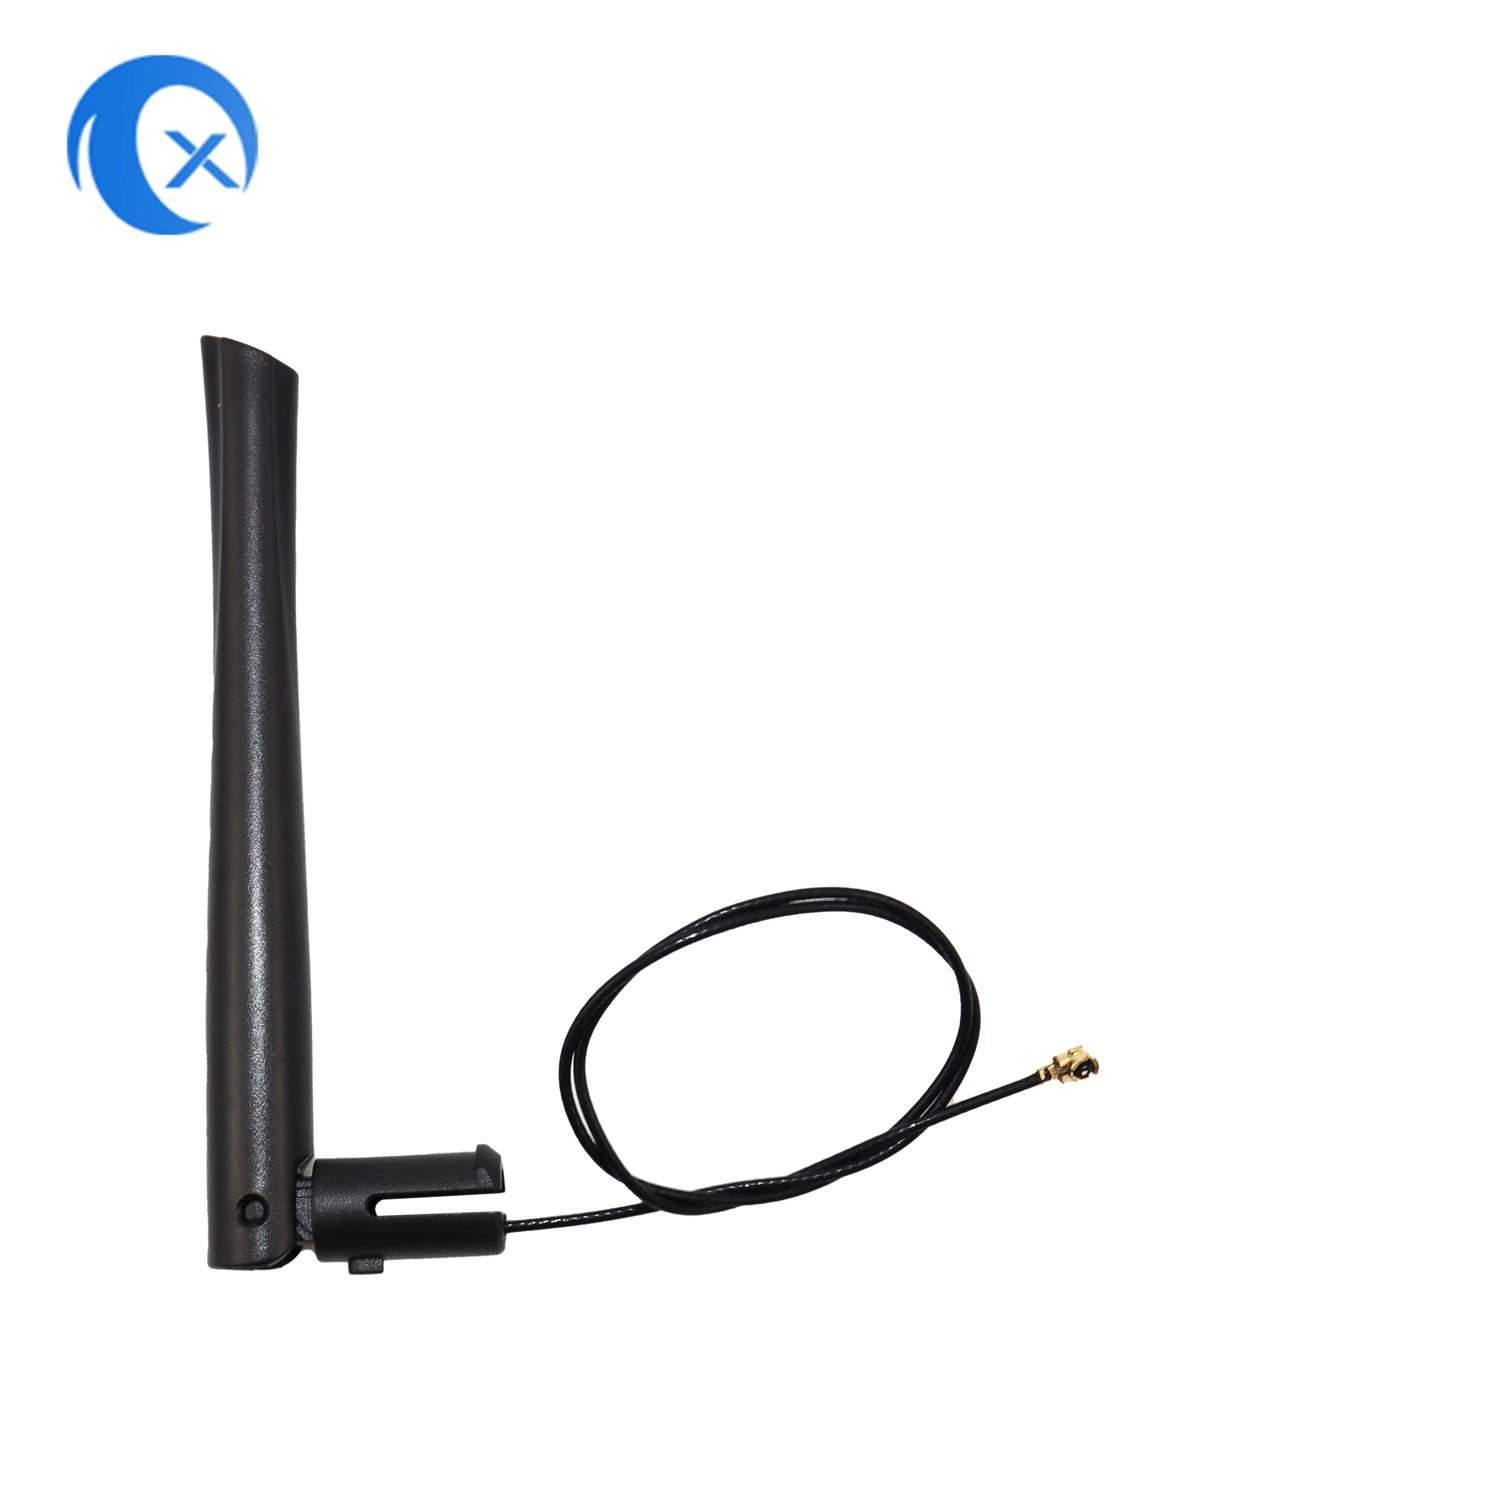 2.4G 2dBi Swivel WiFi Antenna with Flying Wire Ufl Ipex Connector for Security Camera Antenna